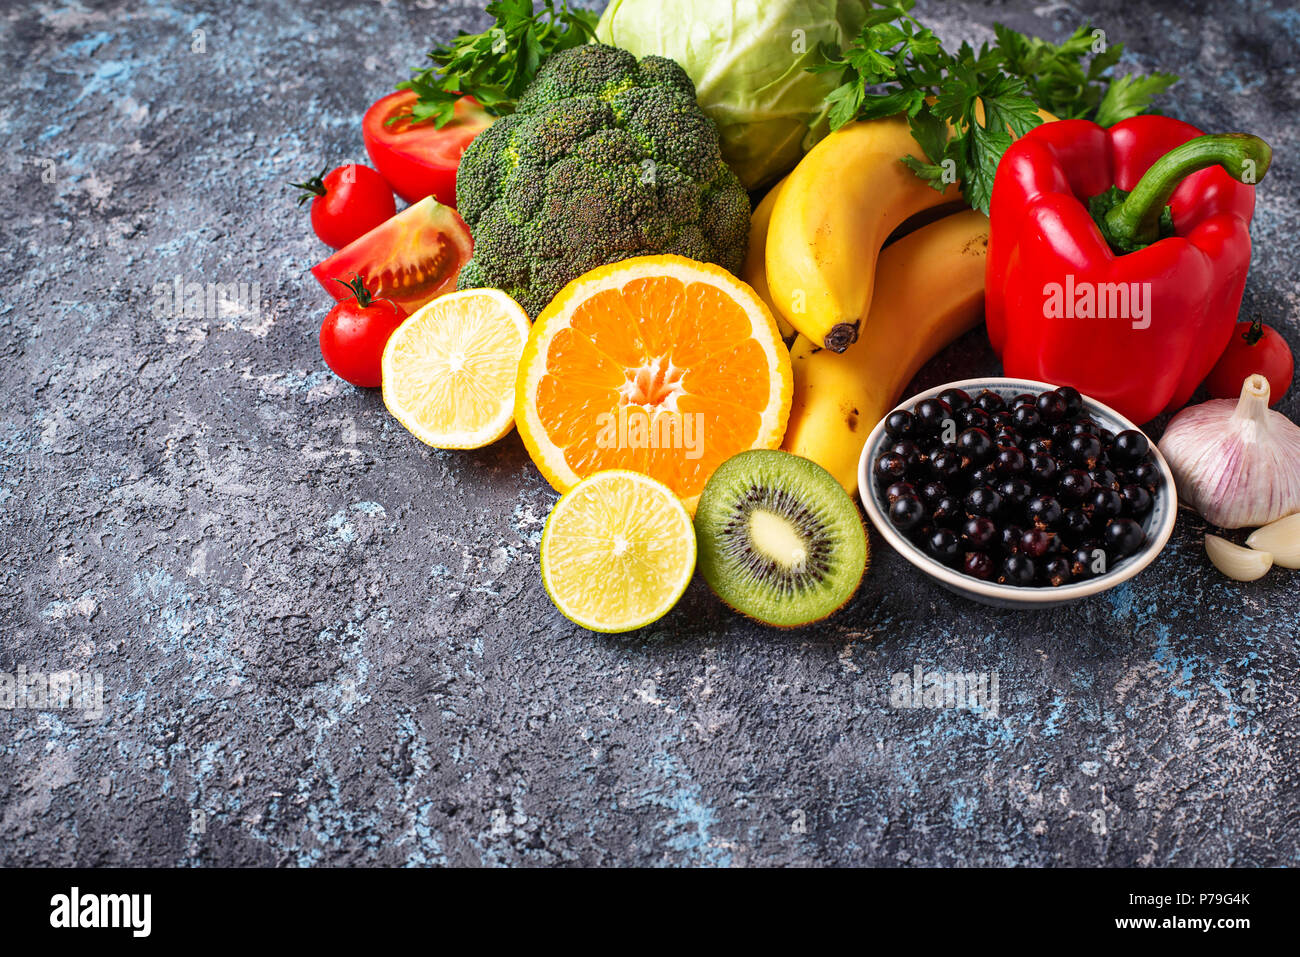 Foods rich in vitamin C. Healthy eating Stock Photo